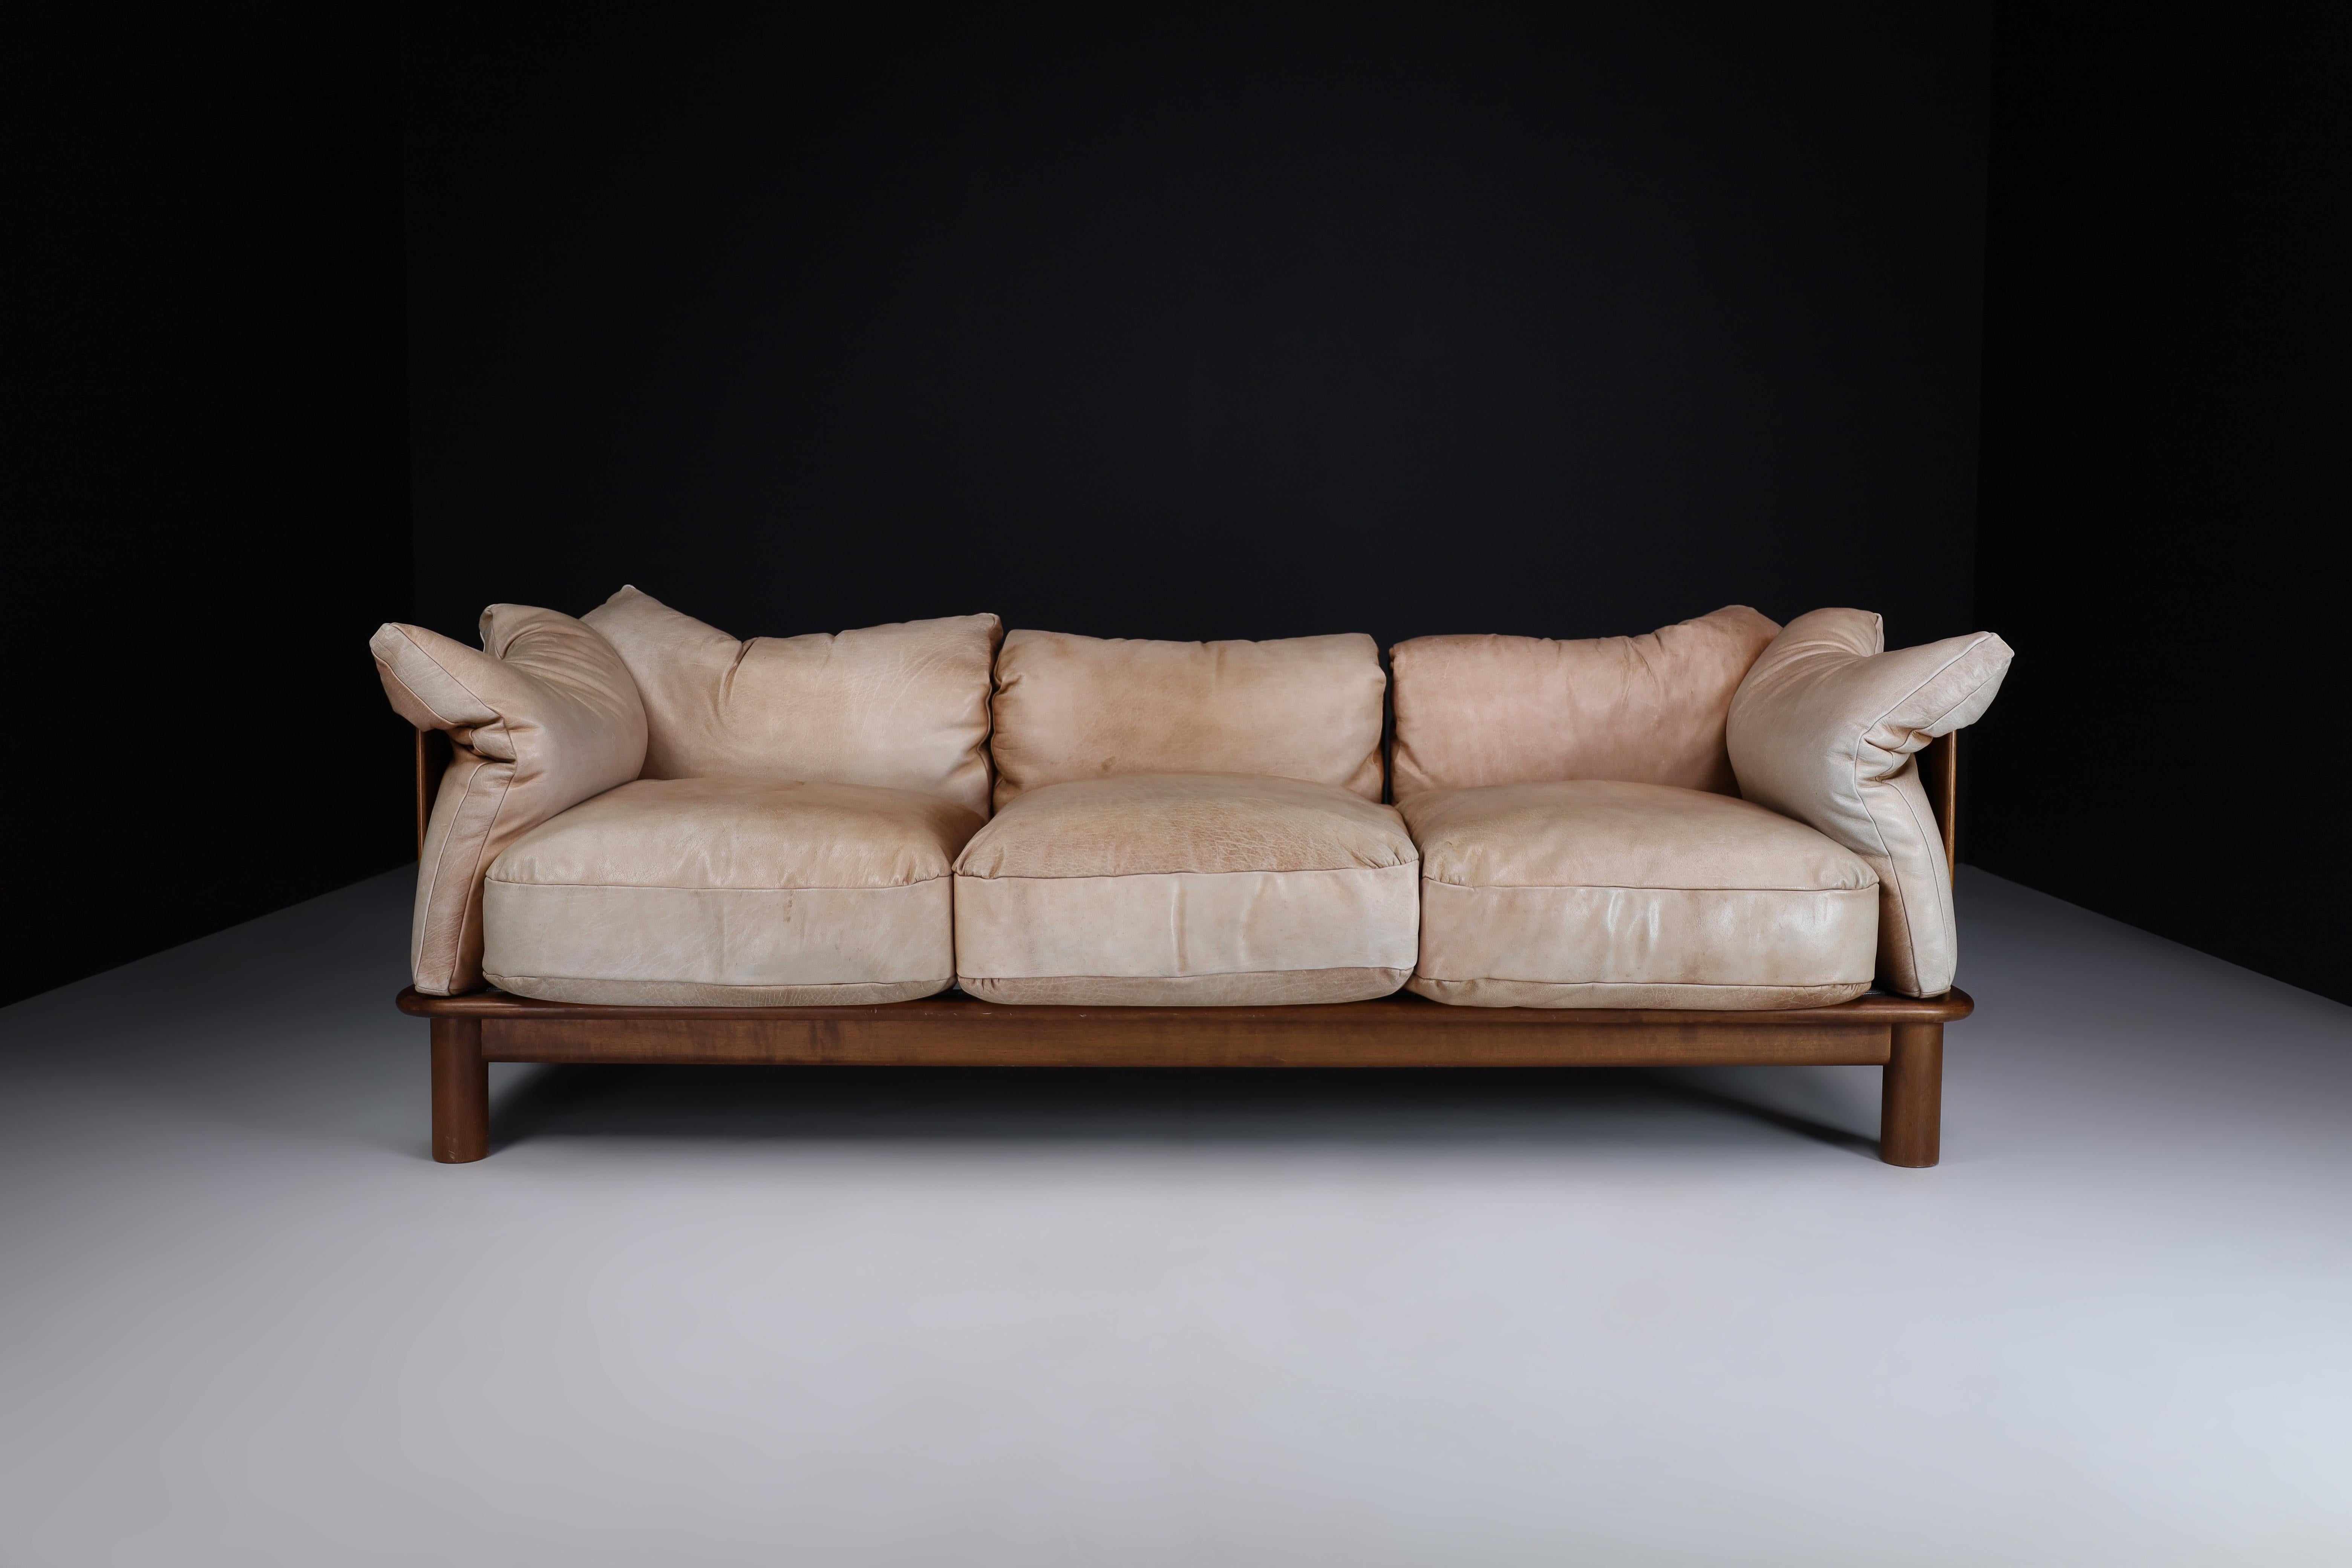 Mid-Century Modern three seat sofa - couch, patinated camel leather, walnut, De Pas, D'Urbino & Lomazzi, Padova, Italy 1970s

Comfortable and gorgeous seating piece by these Italian masters. The patina of the leather is just how we like it to be.